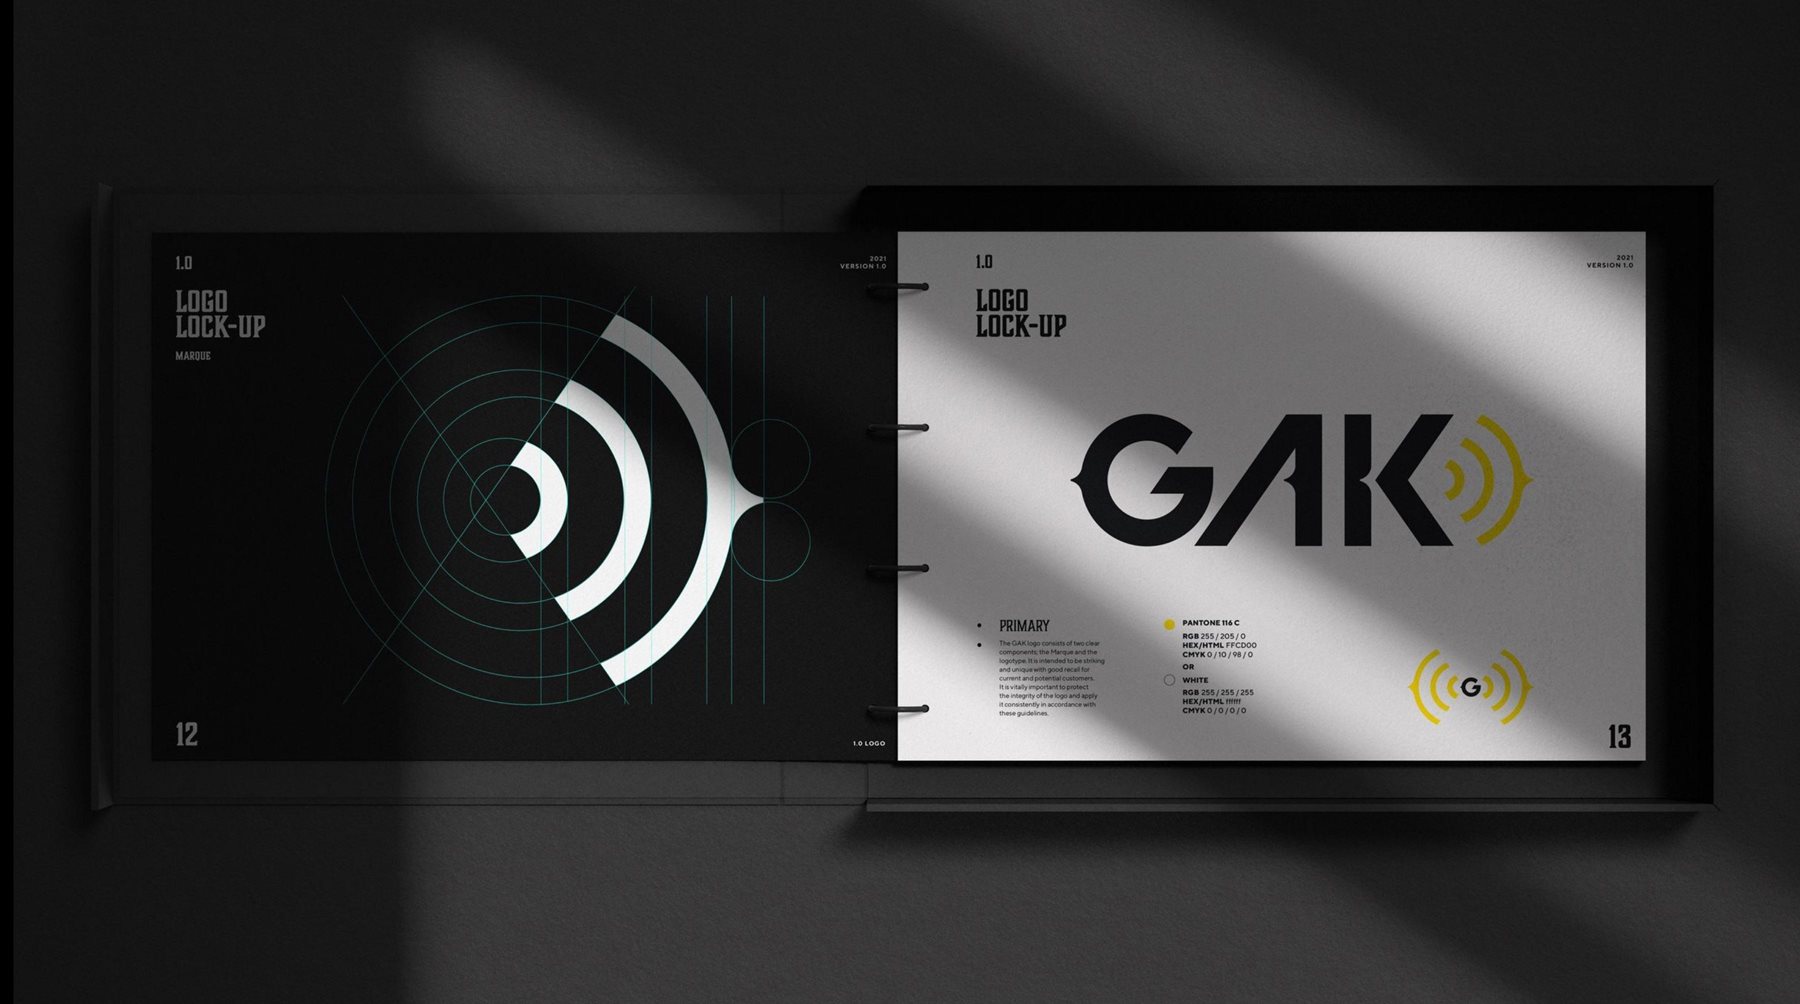 The Gak logo shown with colour references used in the new brand (yellow and black)